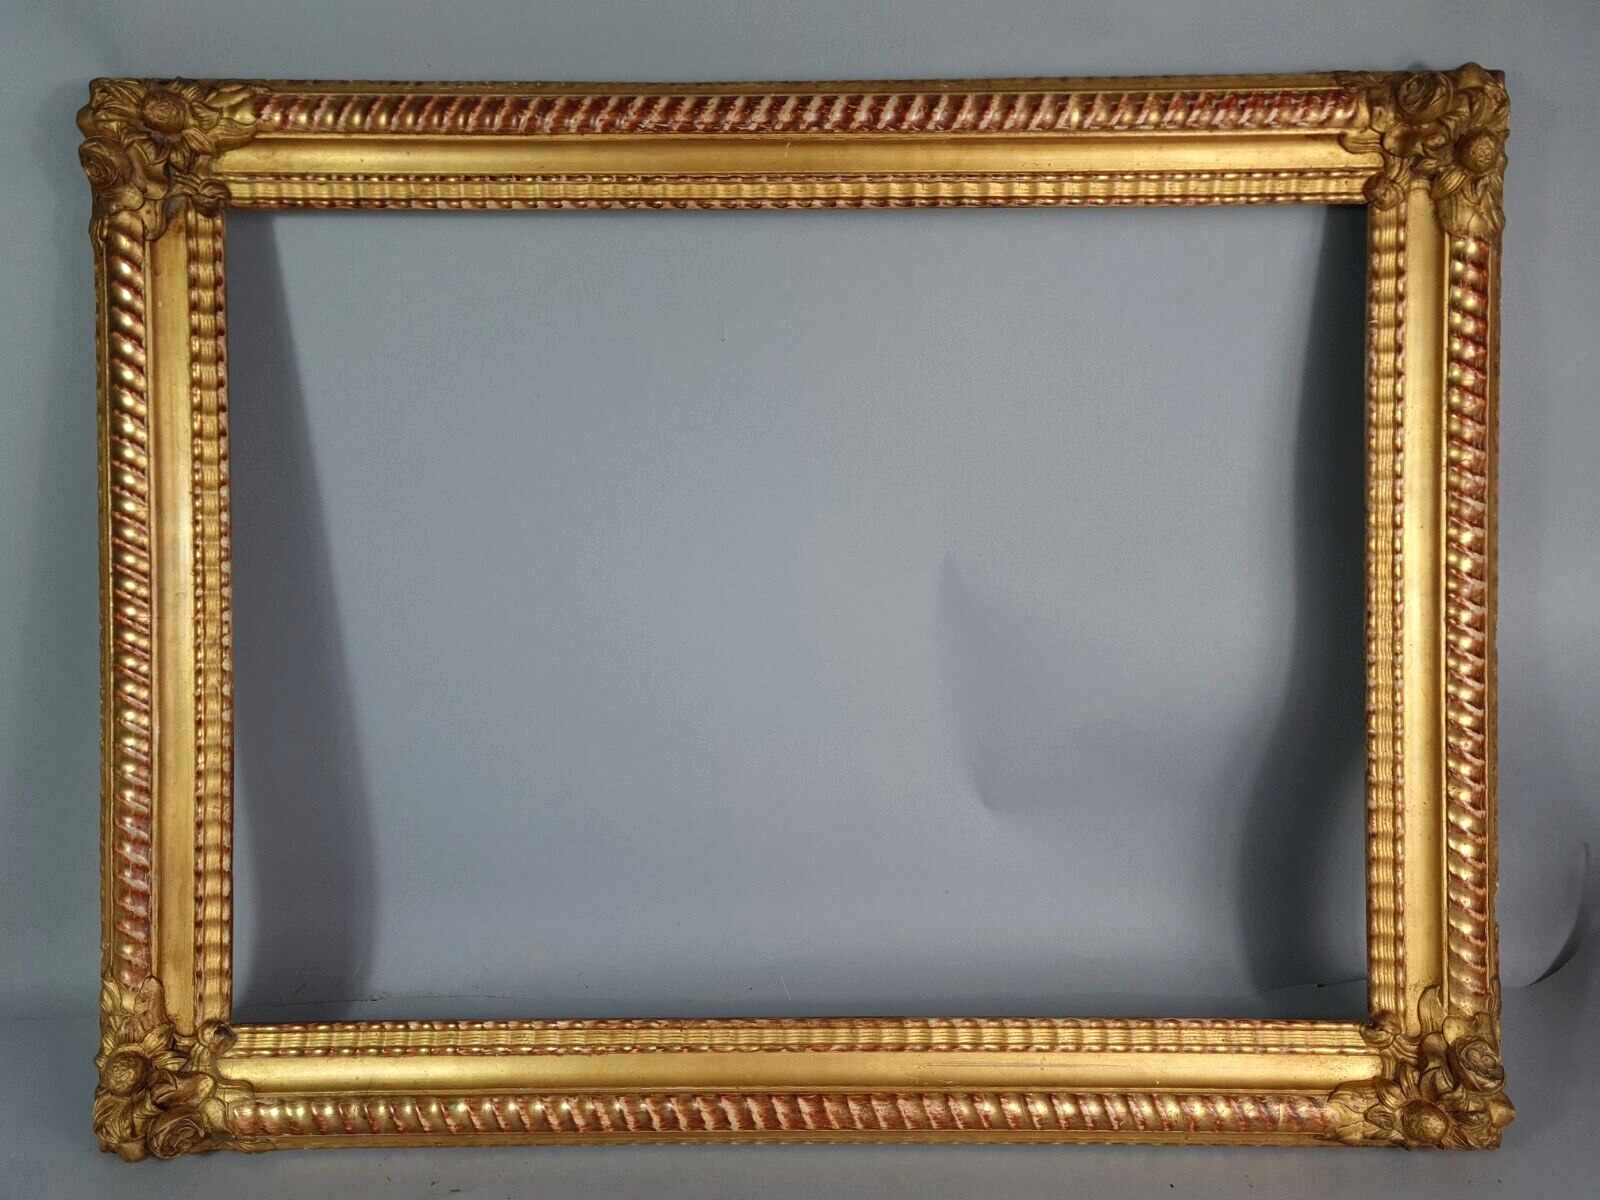 Frame Antique 29 7/8x22 13/16in Rabbet 63,5 To 65x46 18 11/16in Wood Stucco